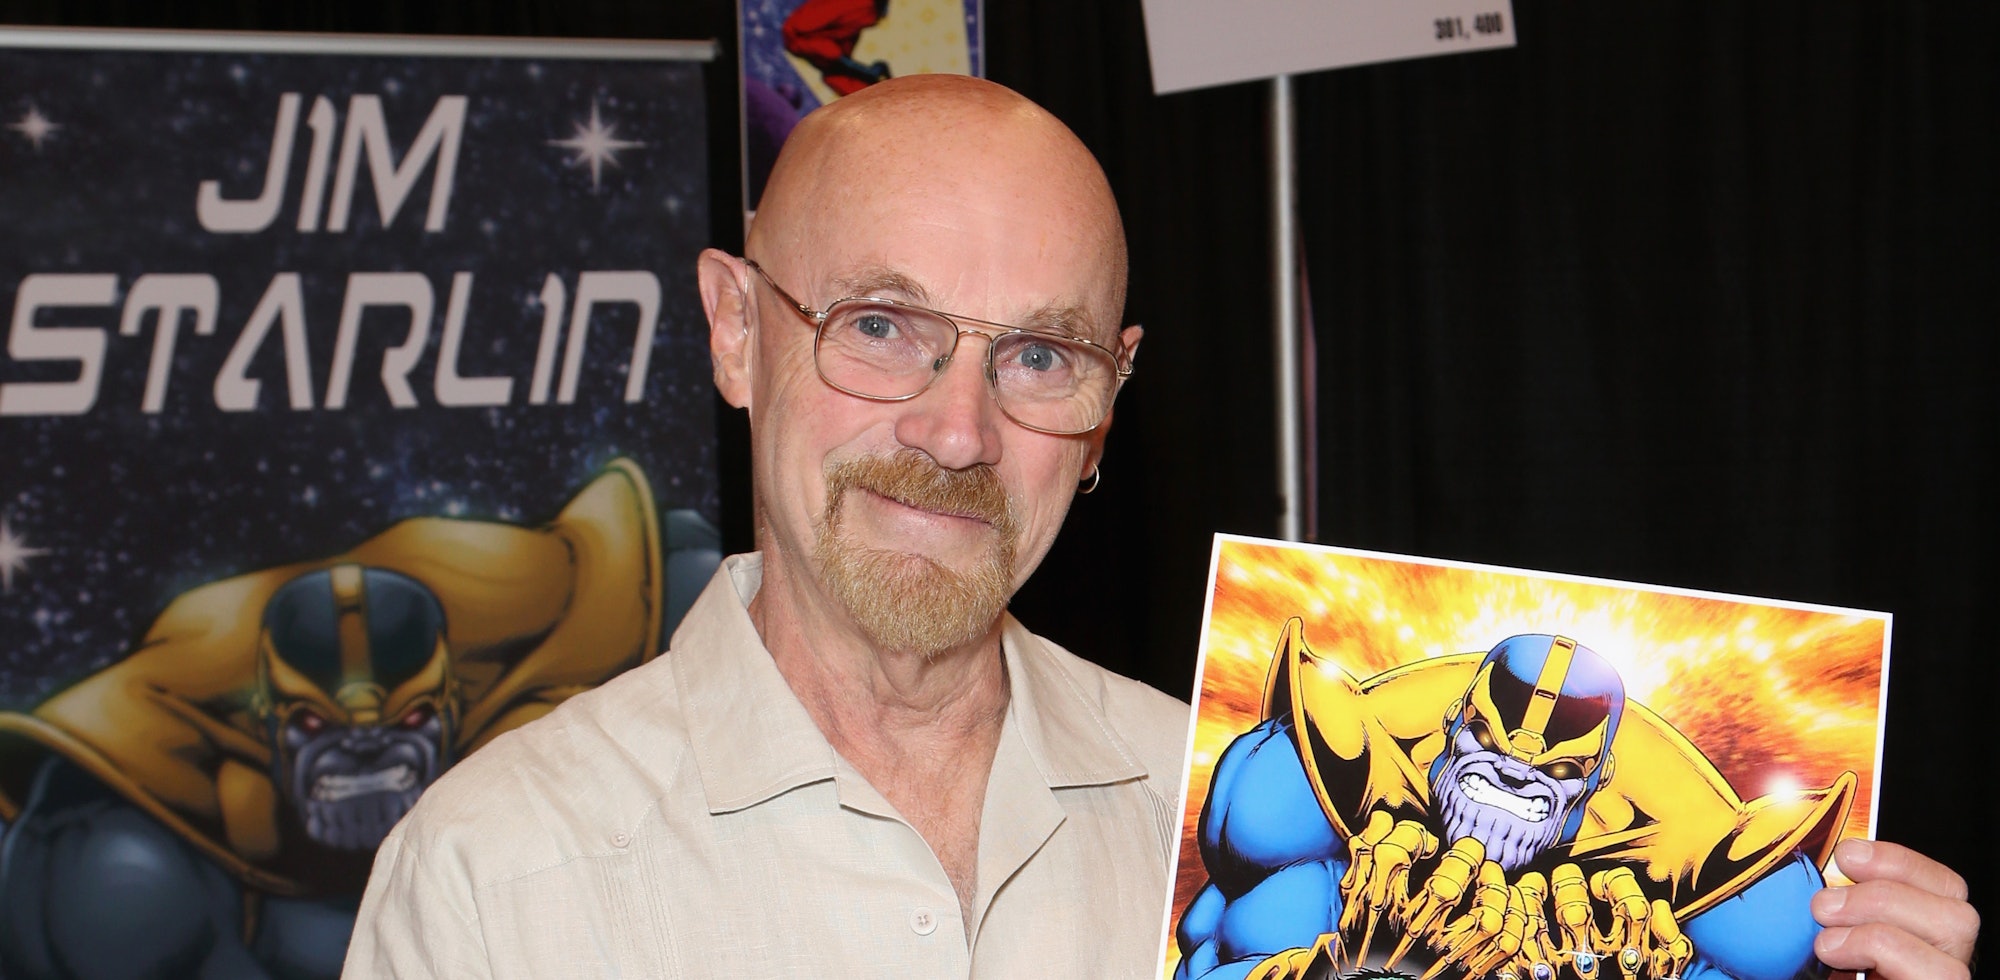 LAS VEGAS, NV - JULY 01:   Artist/writer Jim Starlin holds up his artwork of the character Thanos fr...